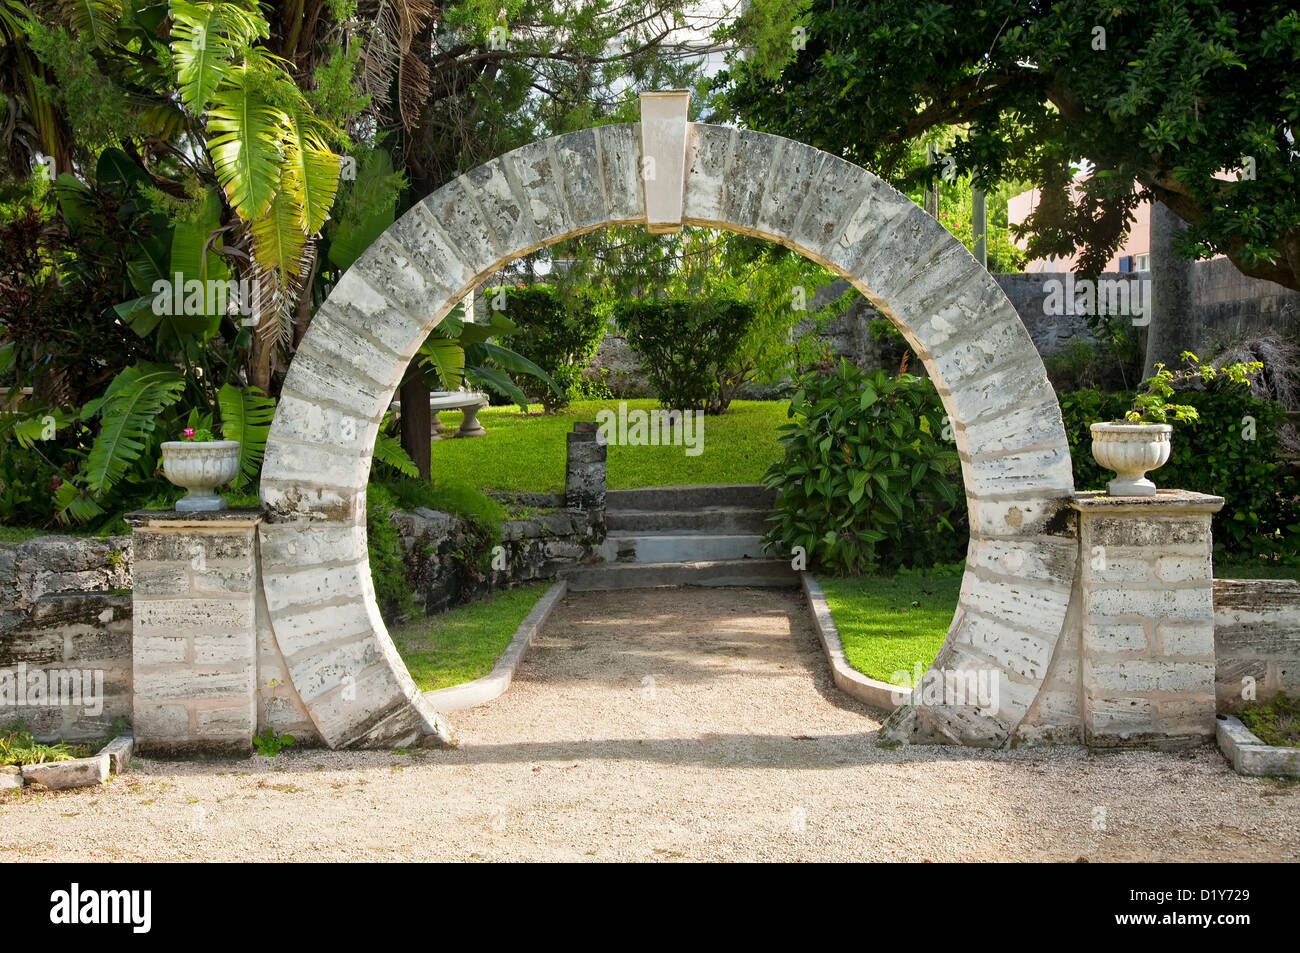 A traditional moongate in a park at St. George's, Bermuda. Stock Photo